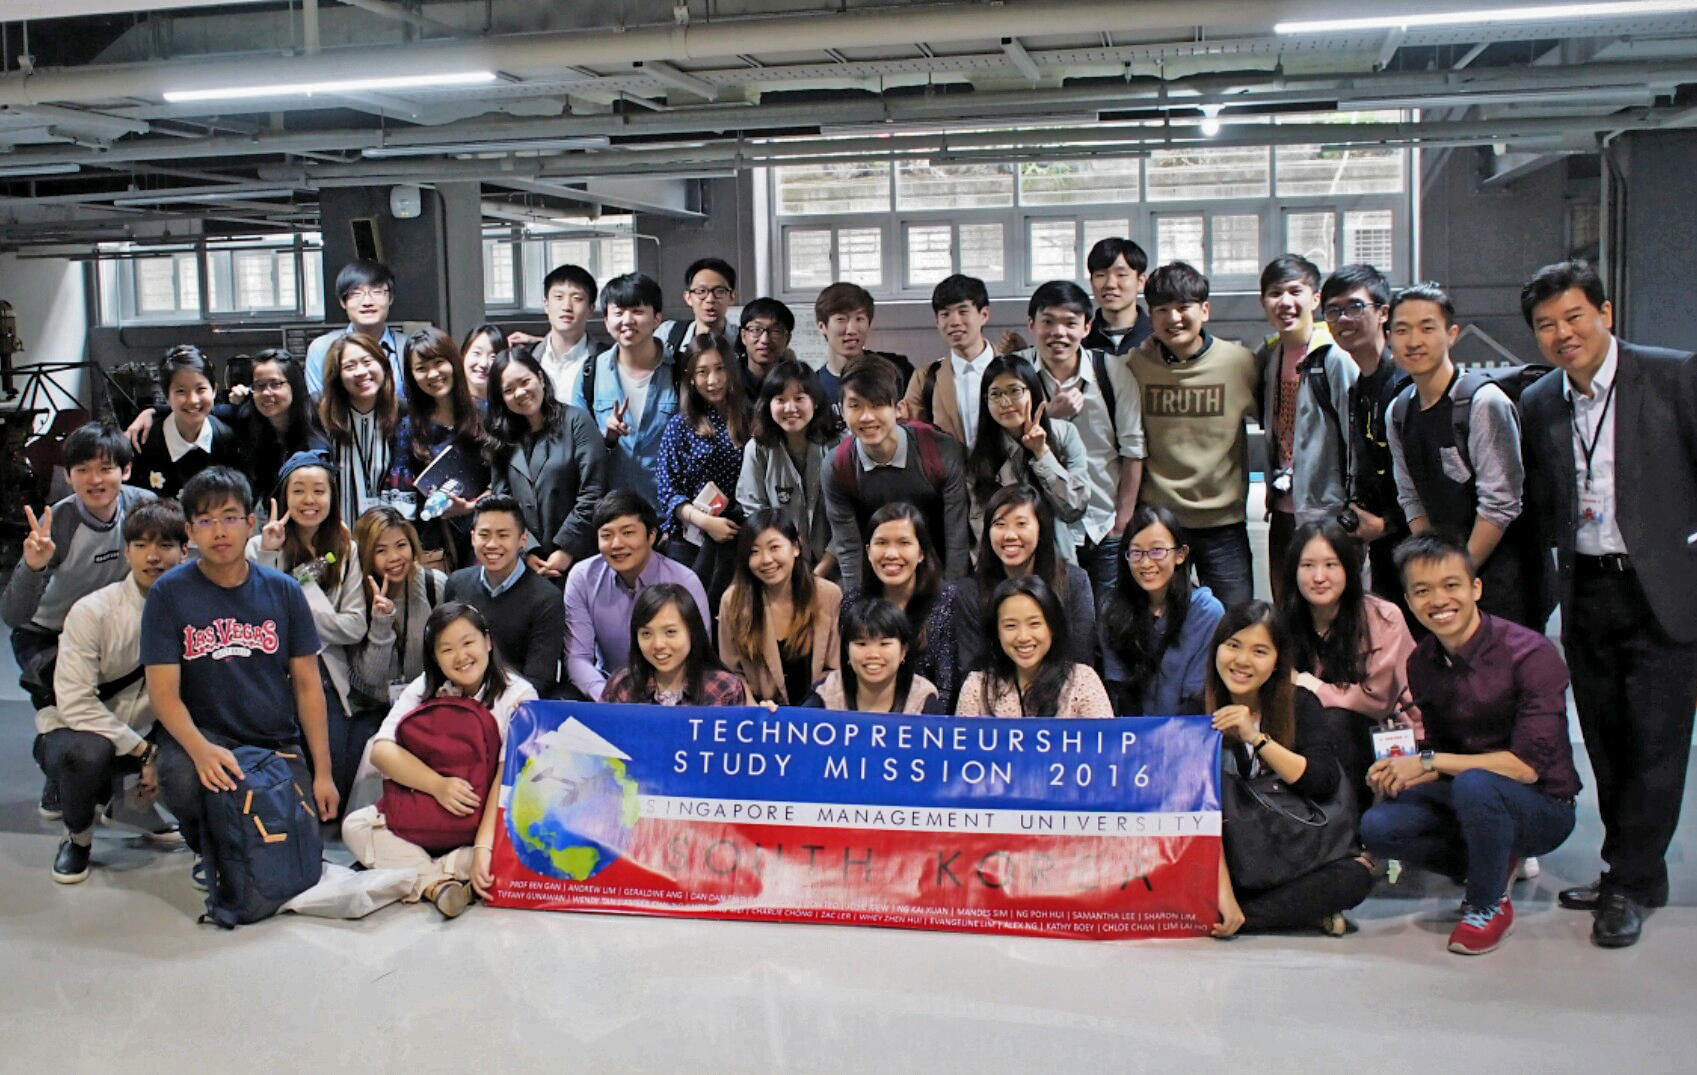 Meeting with students at Seoul National University